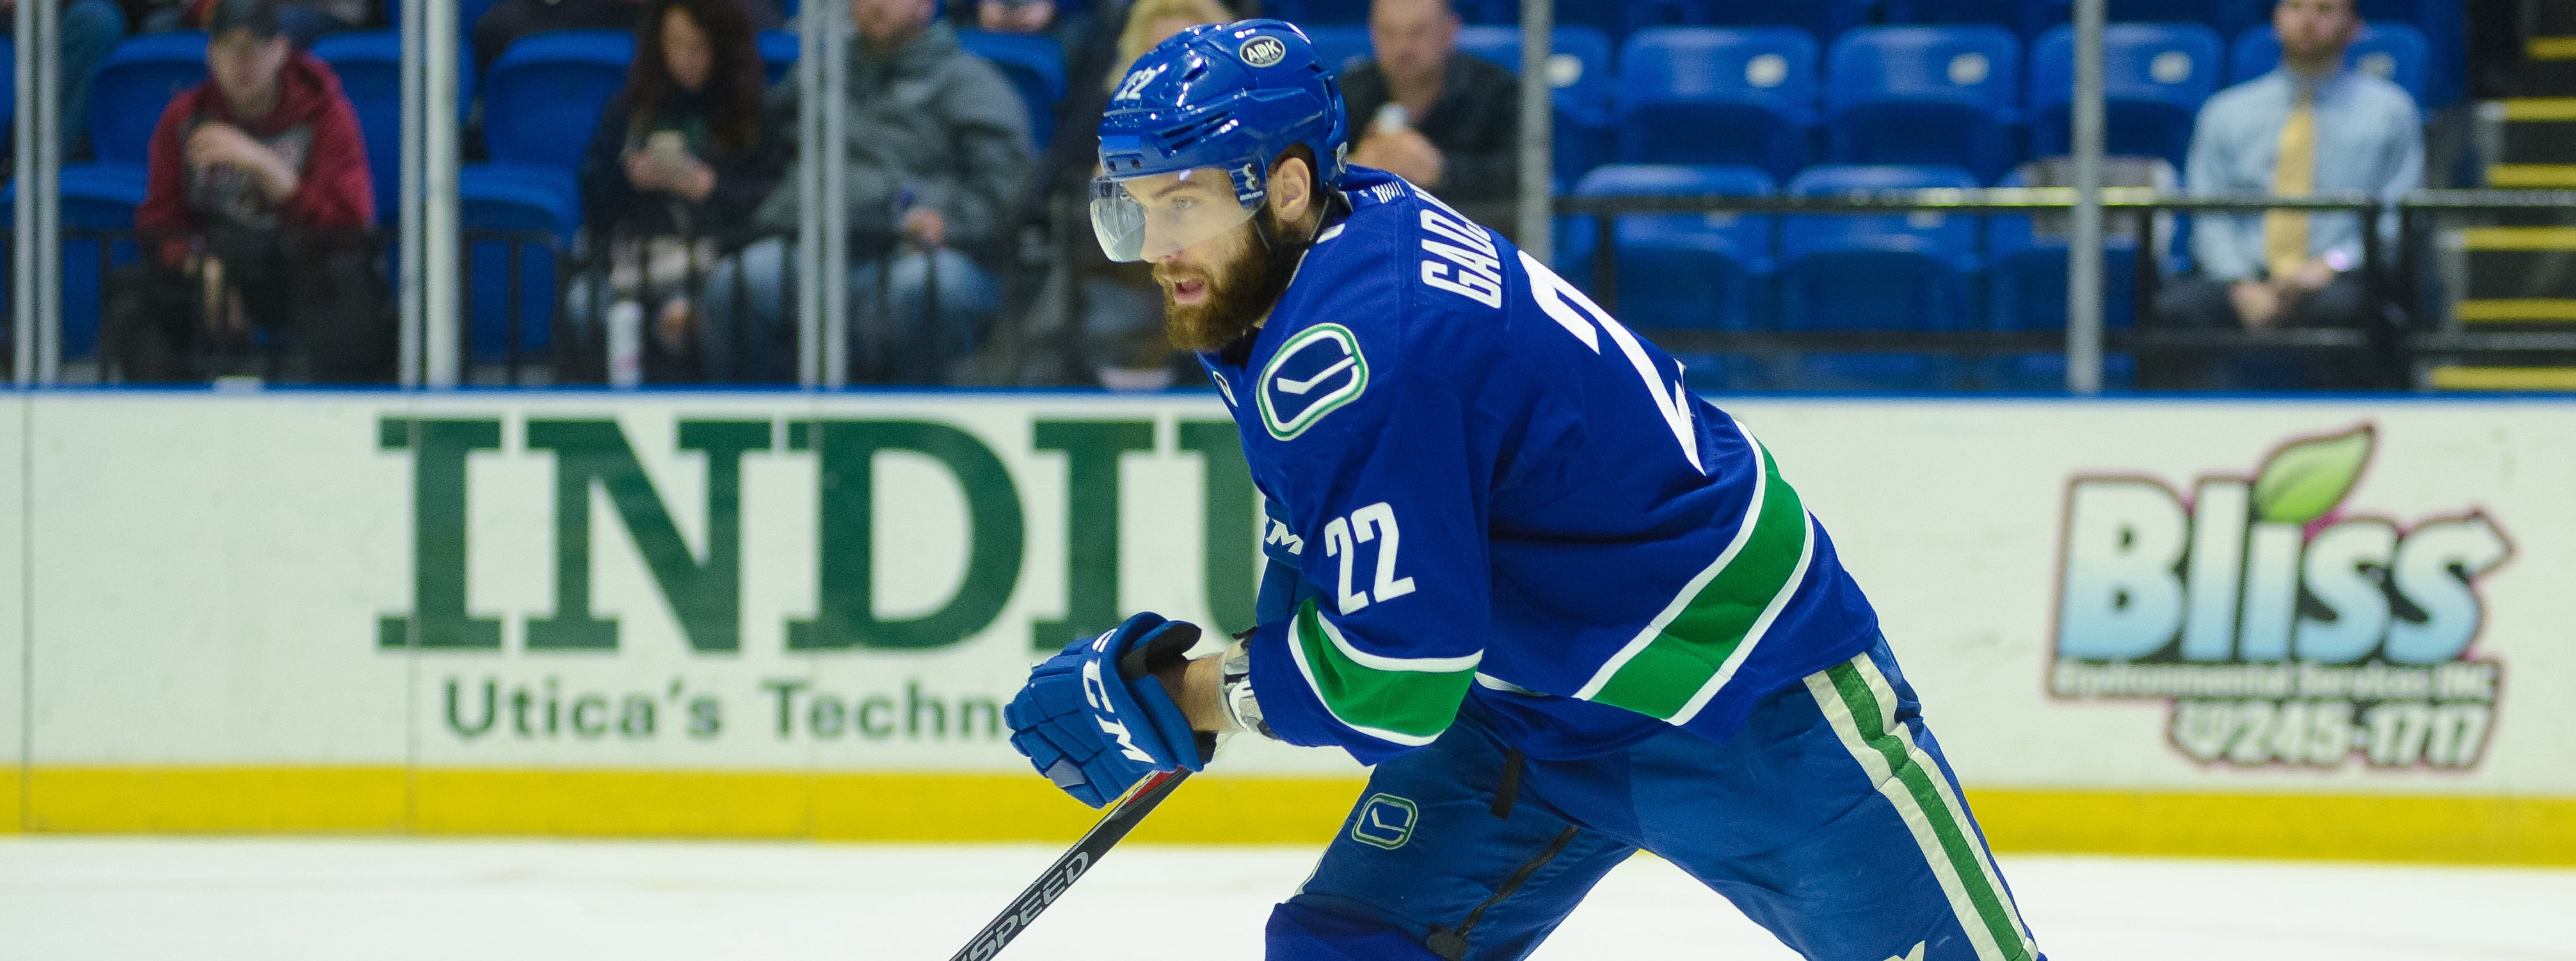 COMETS CLOSE OUT SEASON WITH SHOWDOWN AGAINST CRUNCH